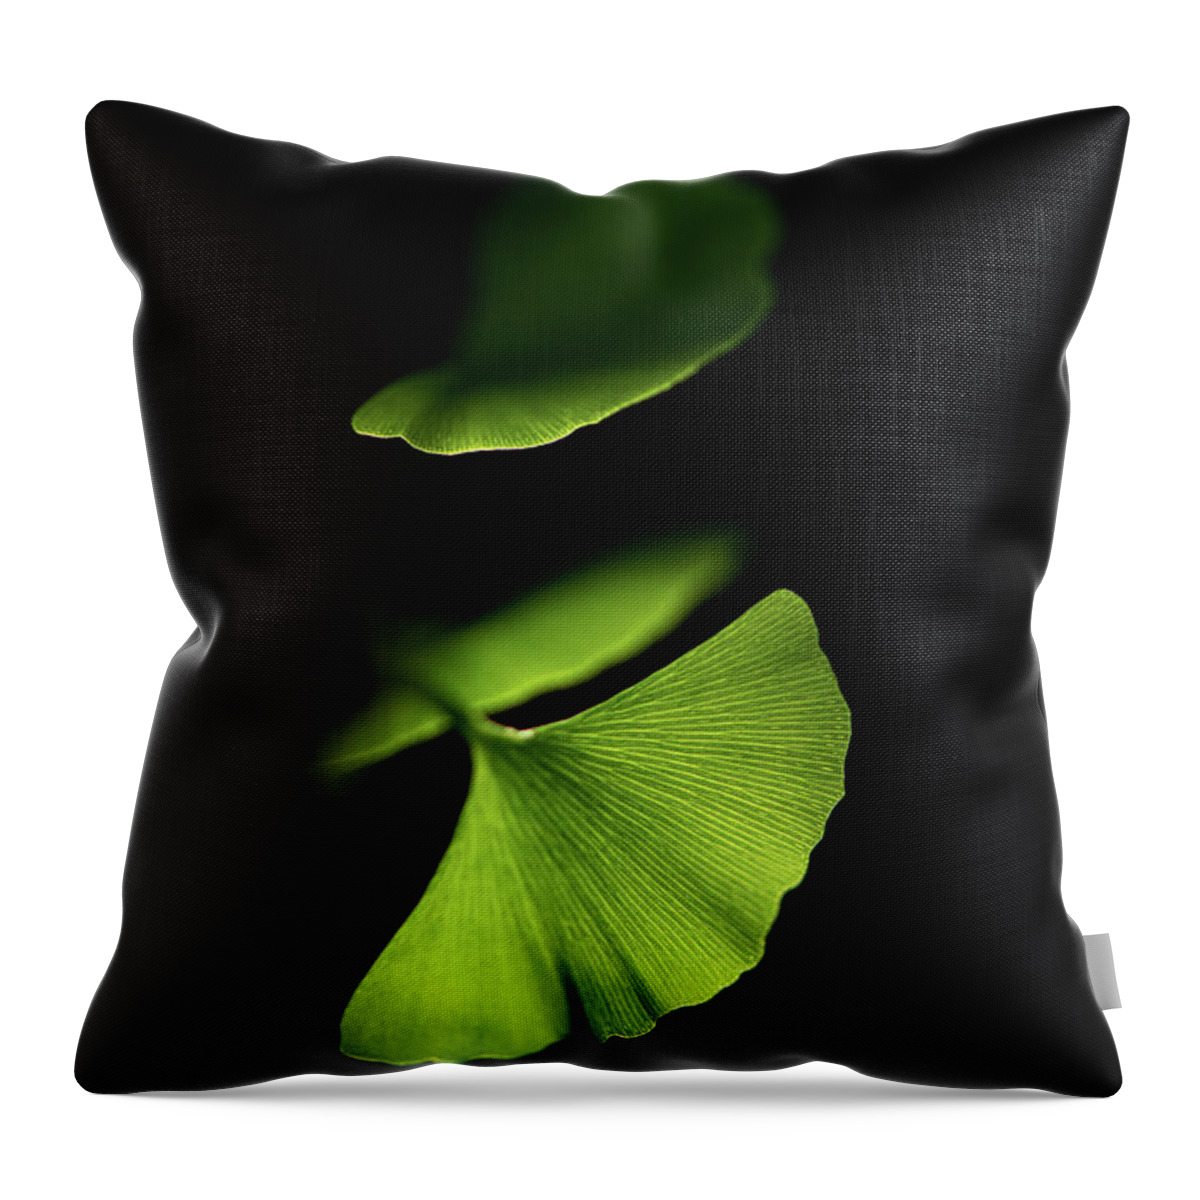 Leaves Throw Pillow featuring the photograph Discretion by Philippe Sainte-Laudy